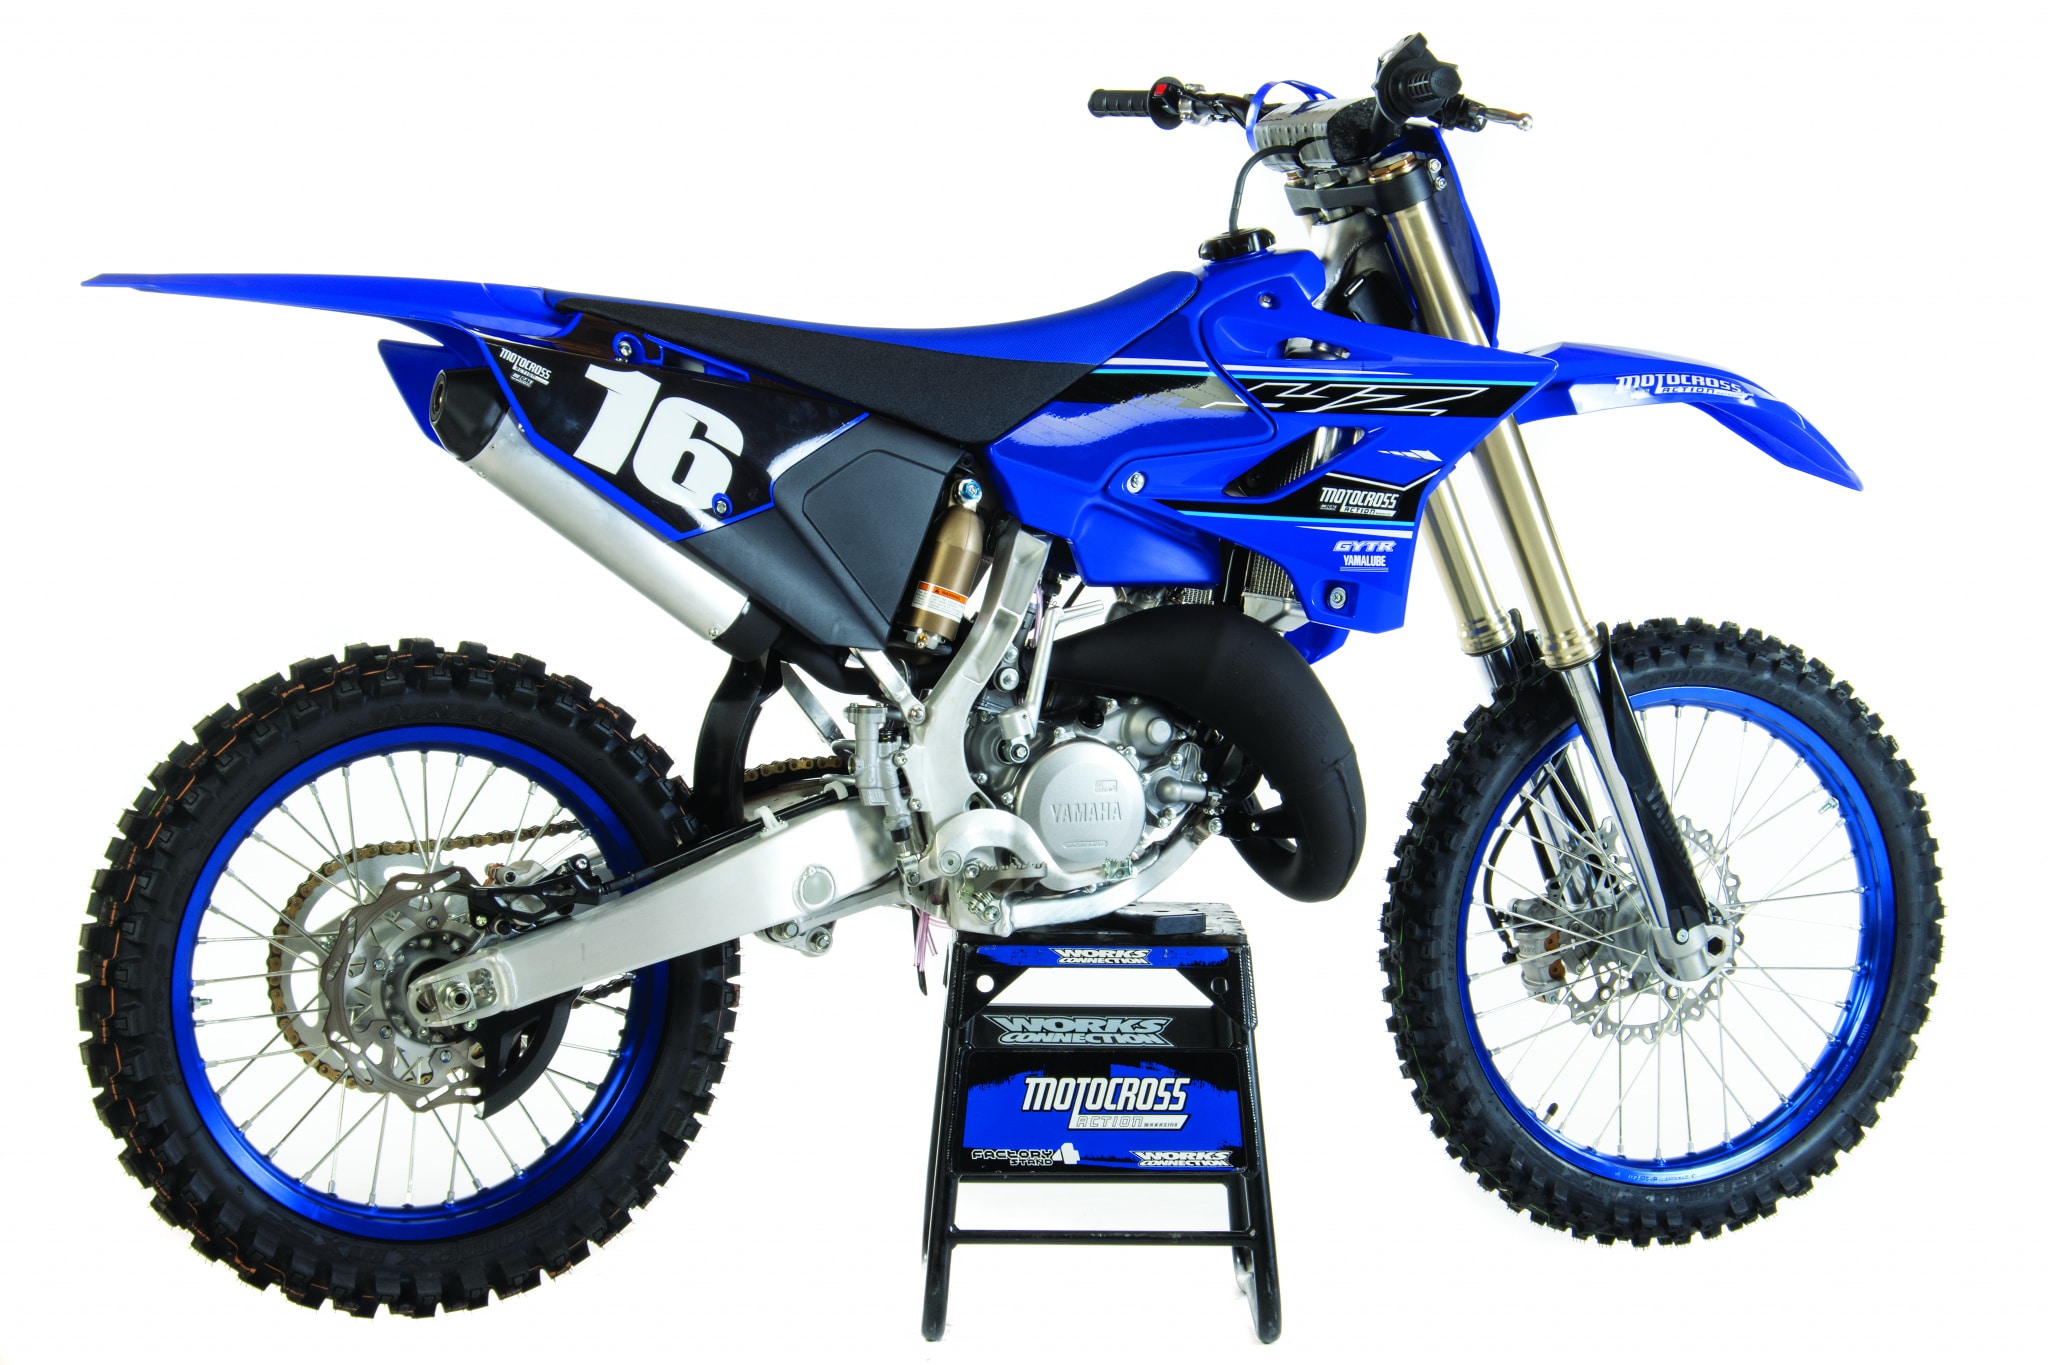 2020 yz125 for sale near me